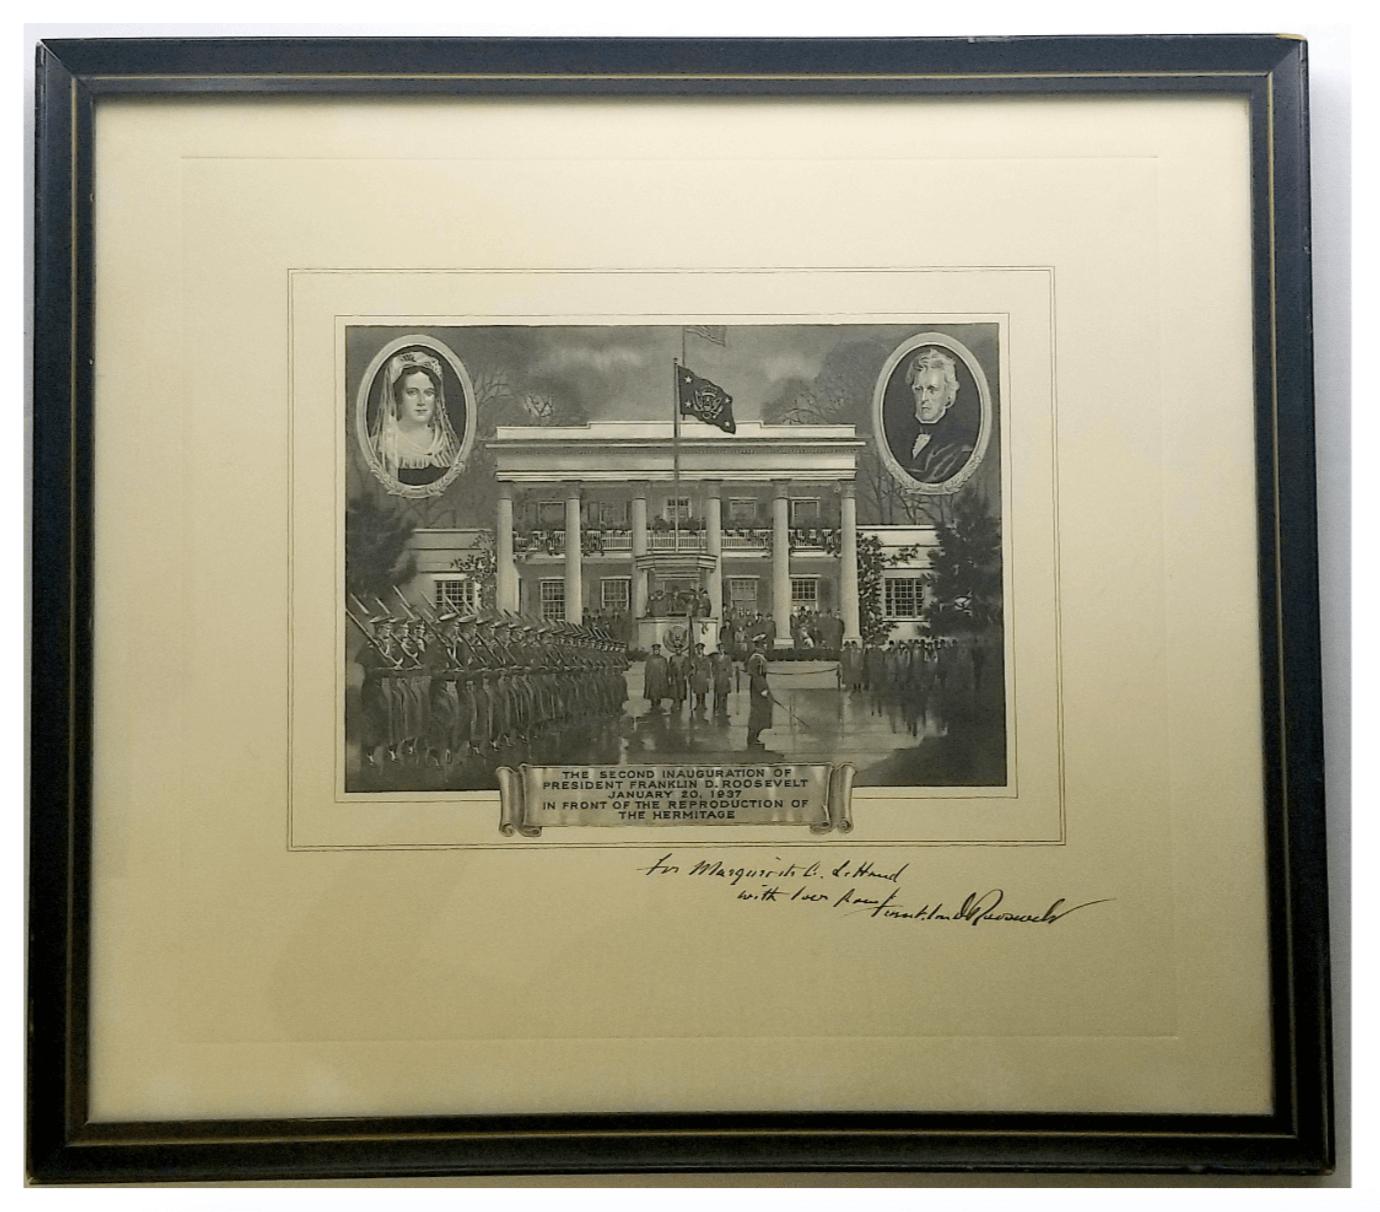 A lithograph from Franklin D. Roosevelt with the words “For Marguerite LeHand, with love.”